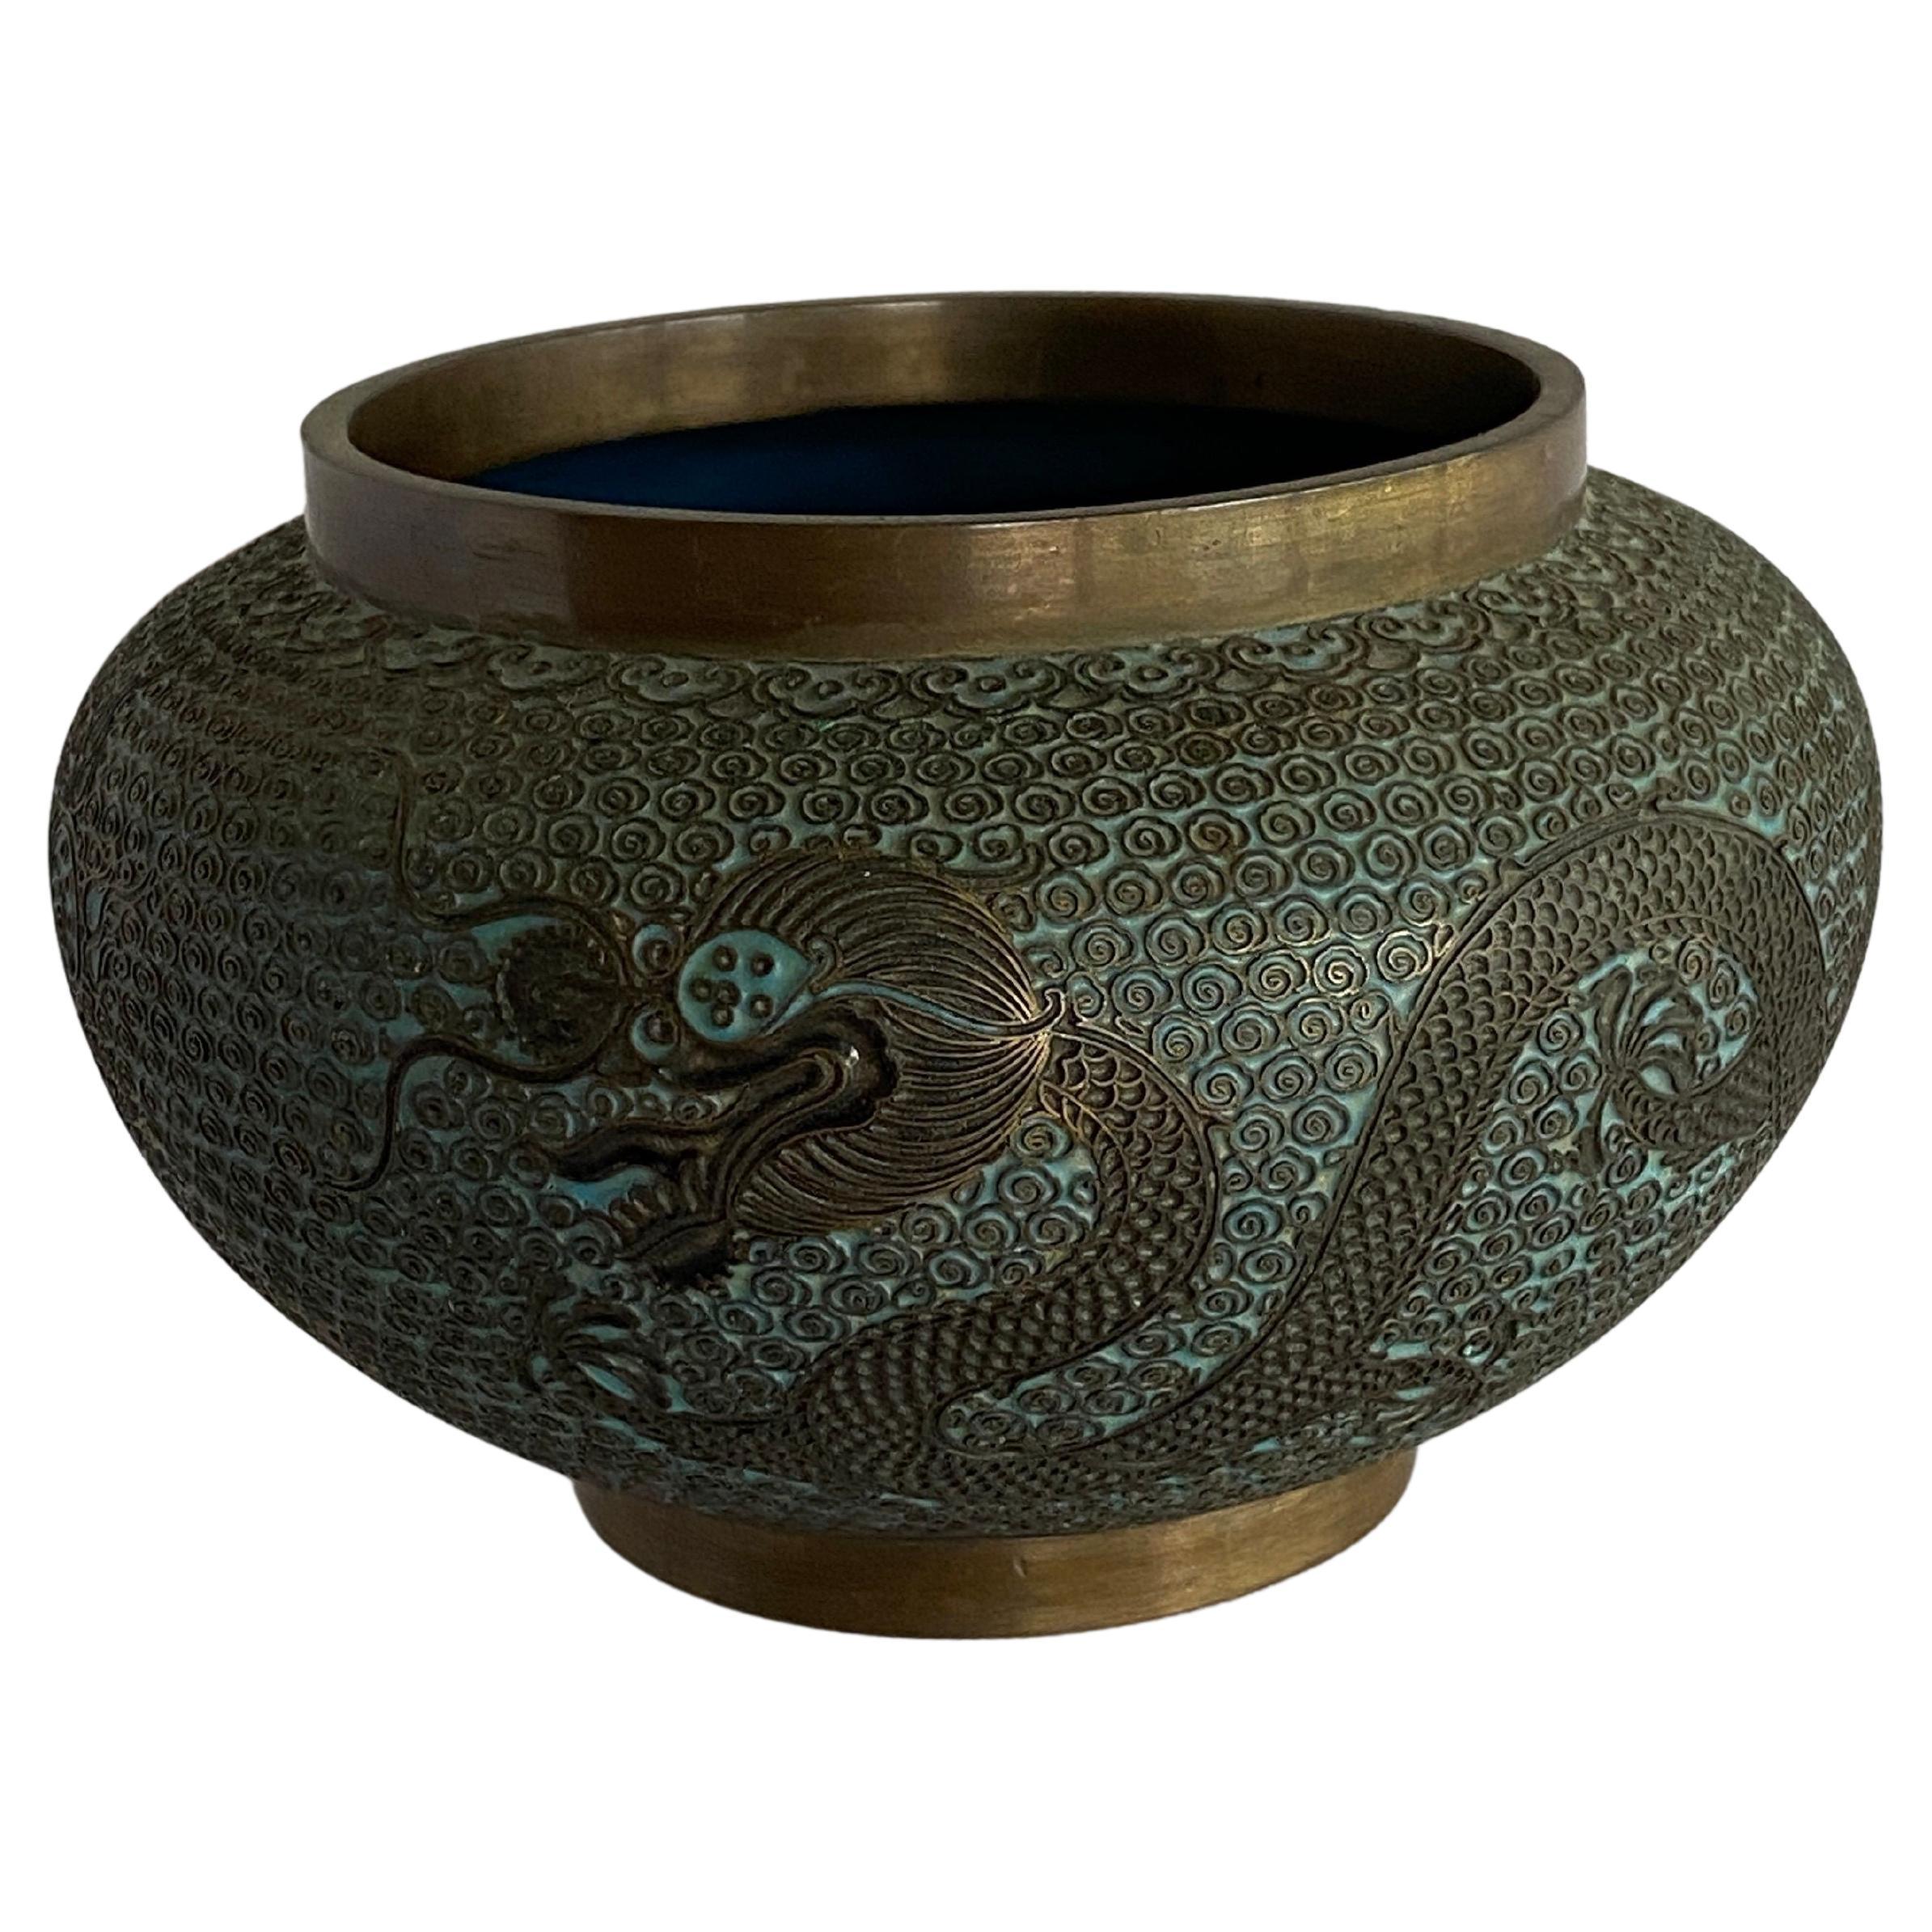 Chinese Dragon Bowl - 14 For Sale on 1stDibs